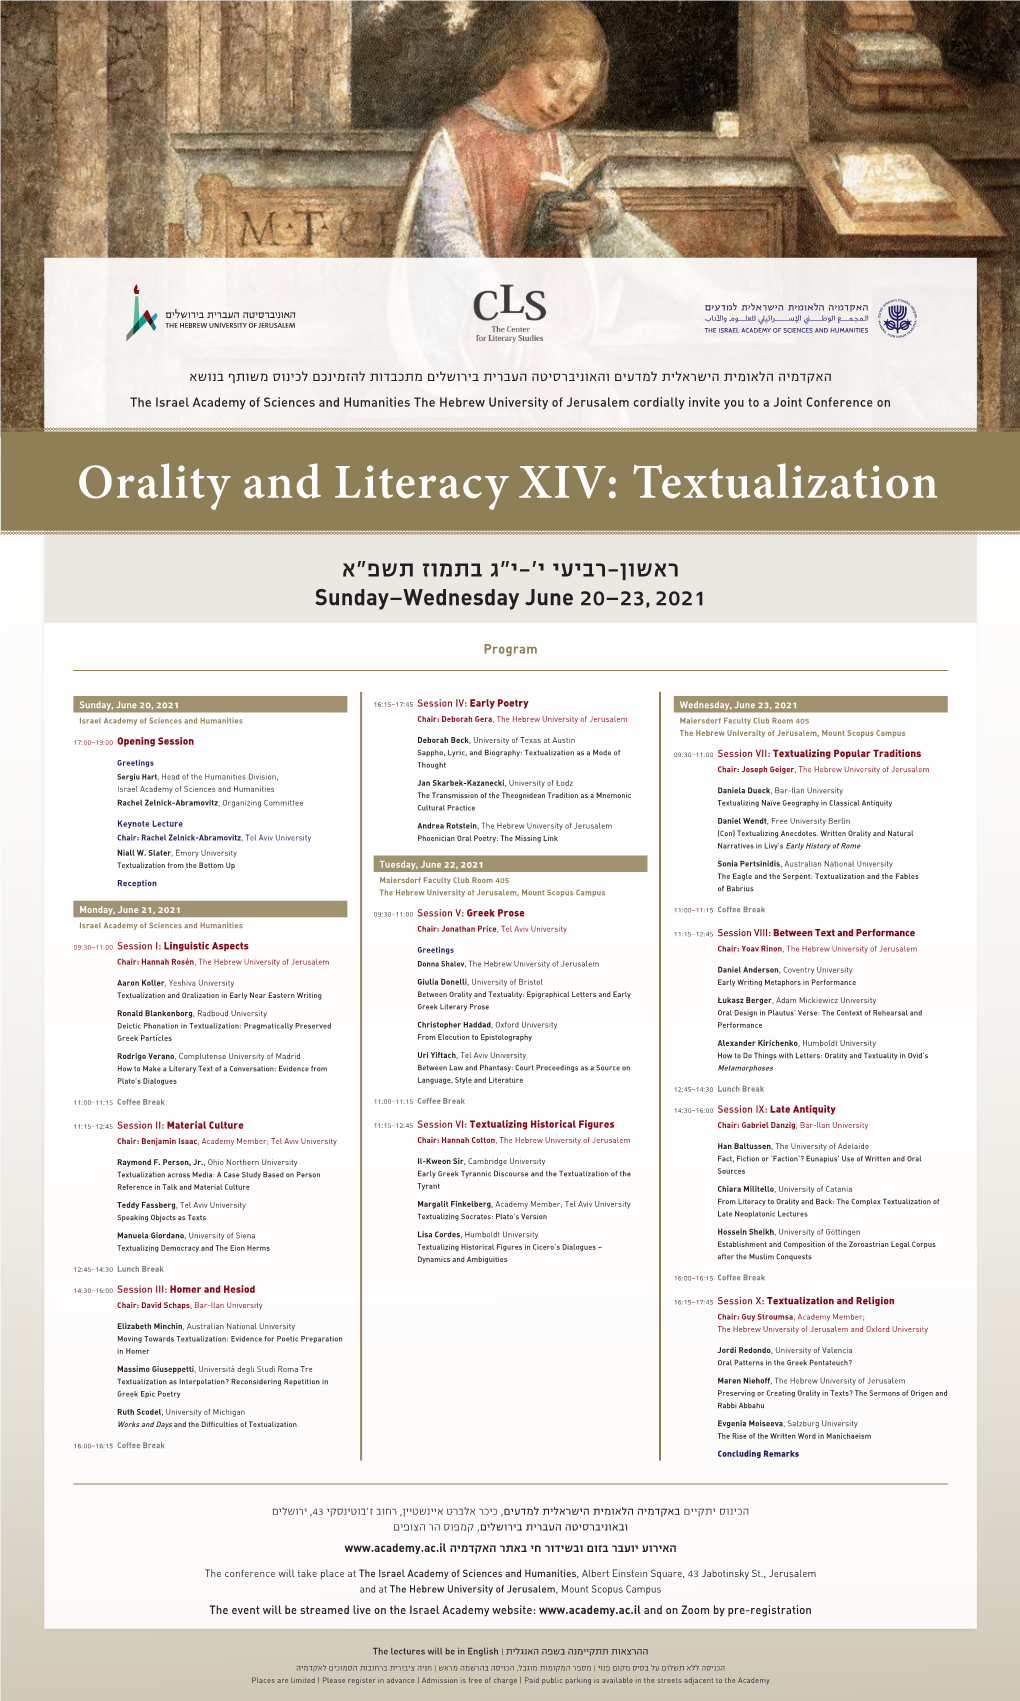 Orality and Literacy XIV: Textualization